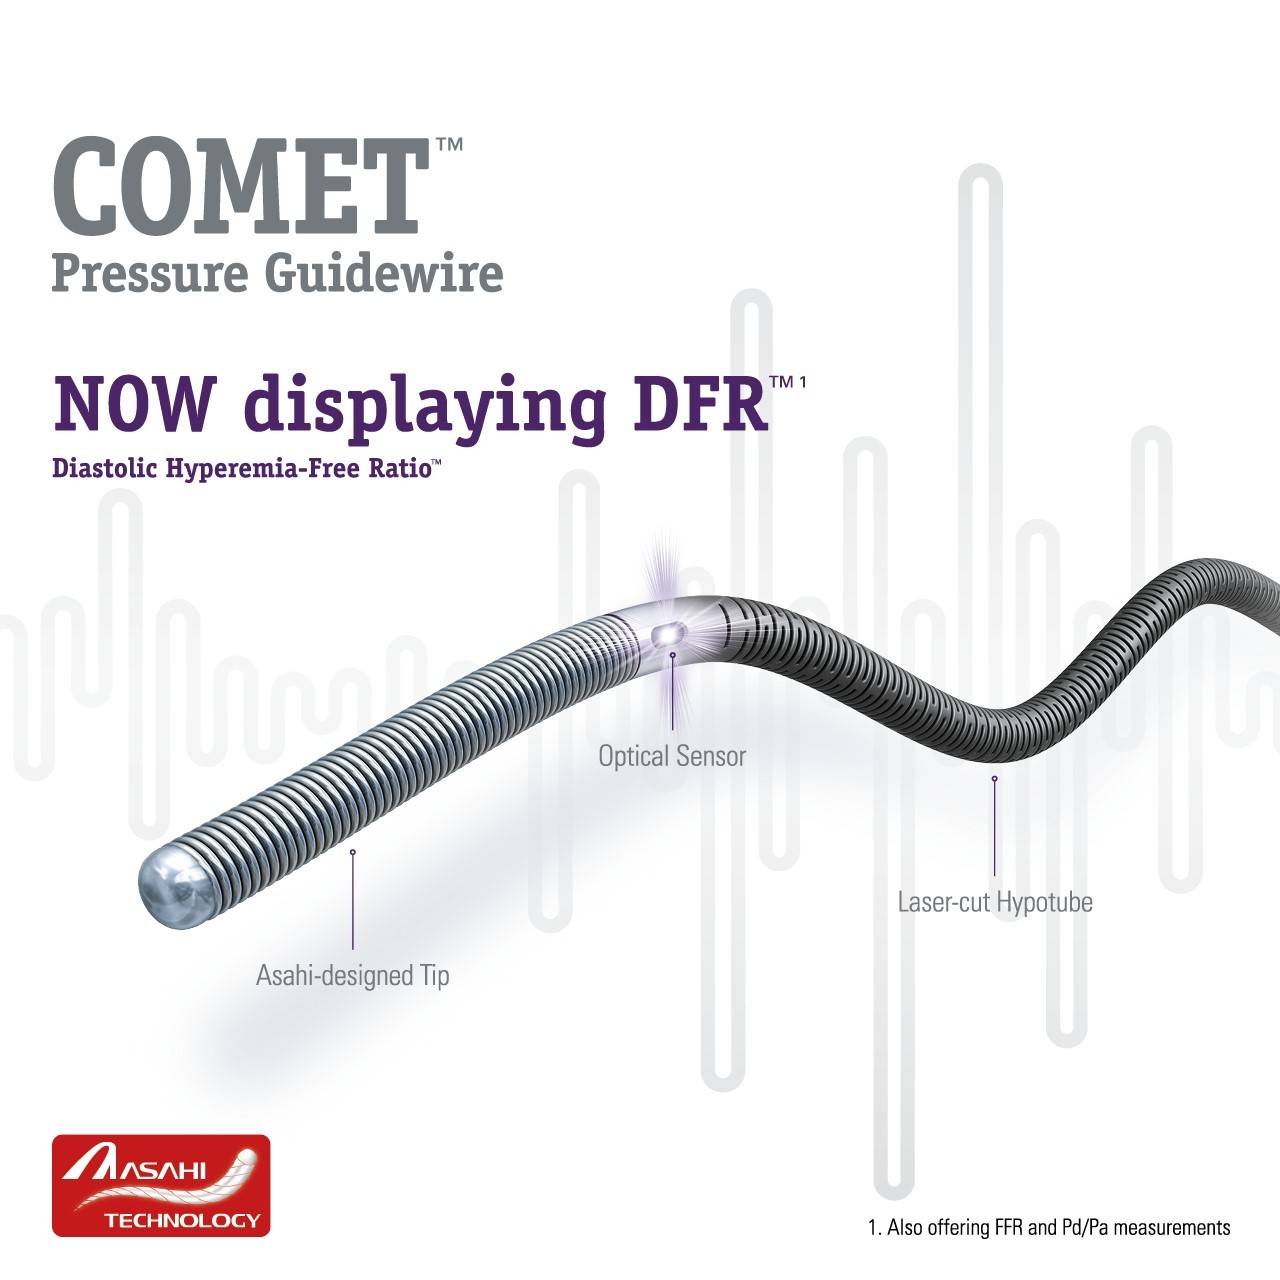 COMET&trade; Pressure Guidewire - Now displaying DFR&trade;